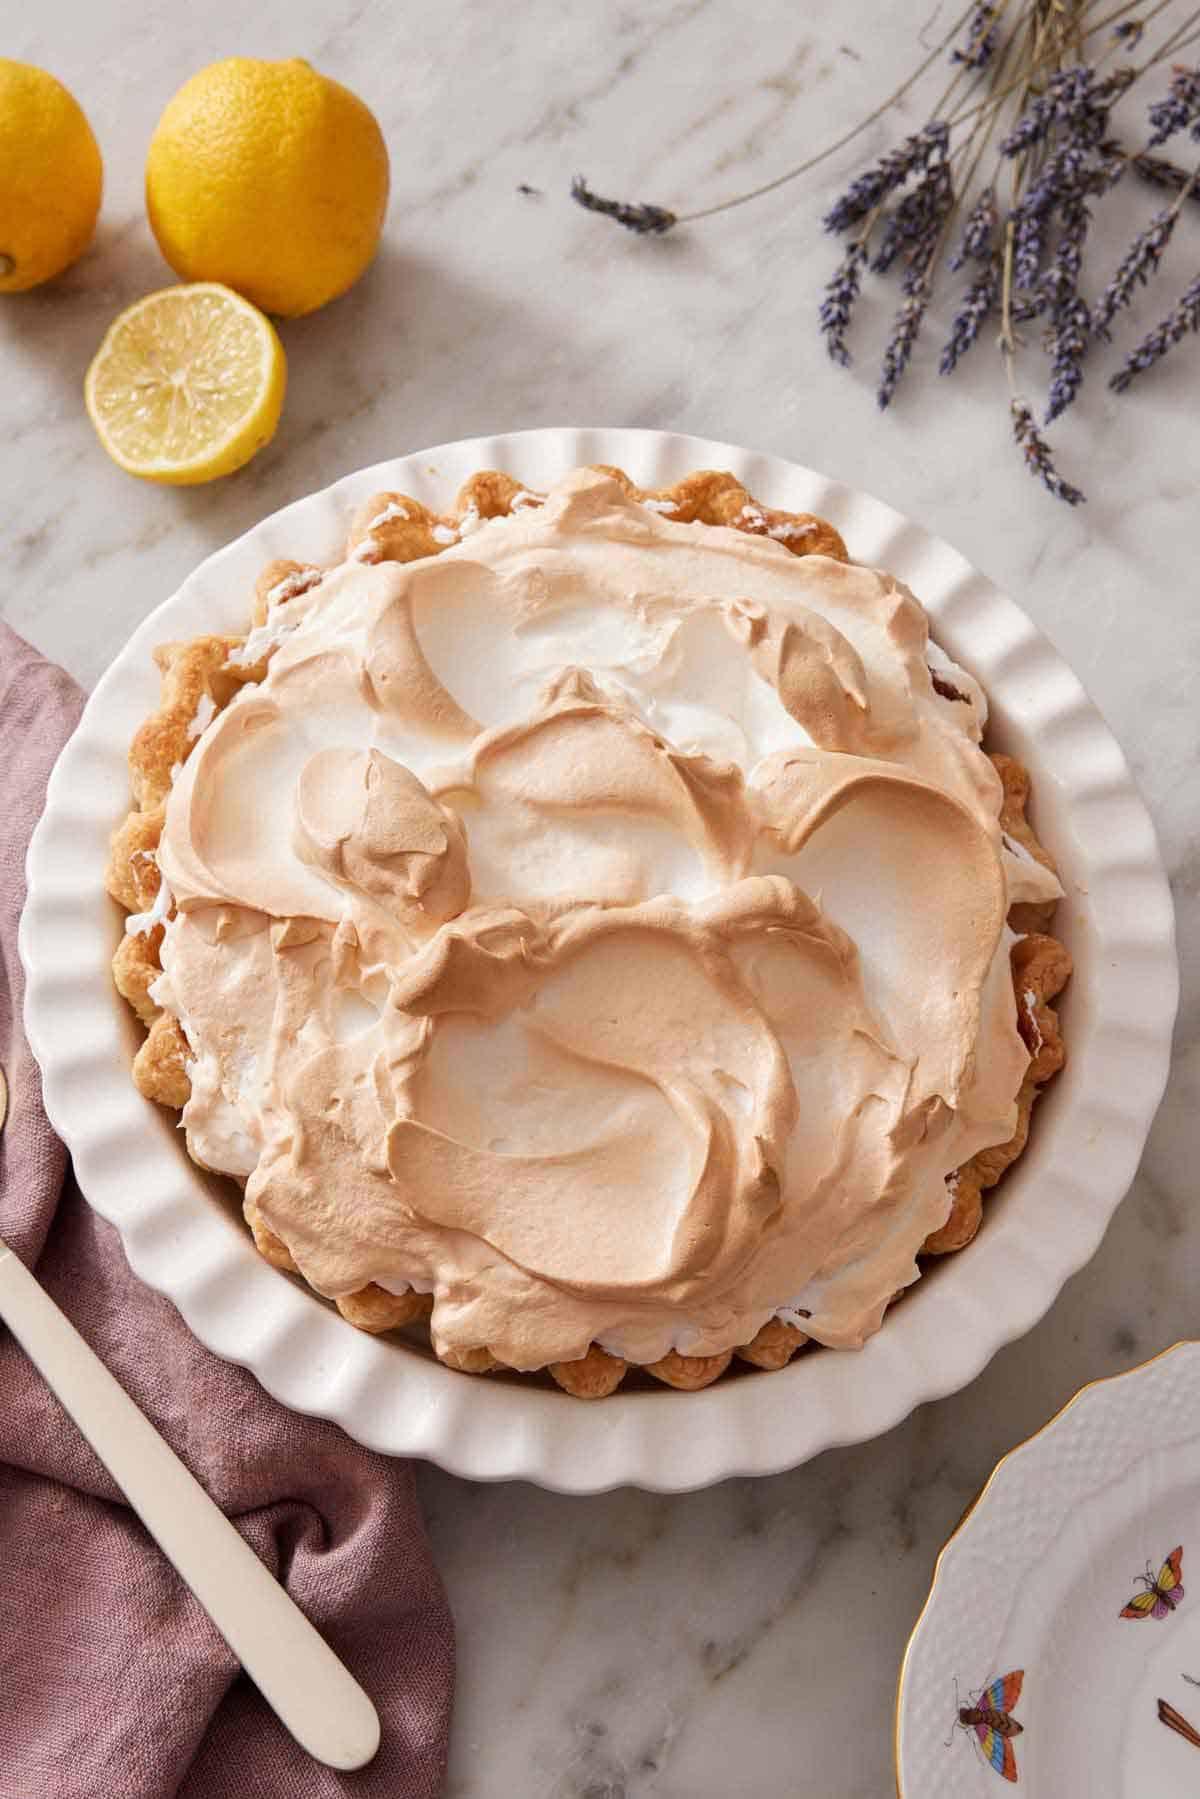 A whole lemon meringue pie in a white baking dish with some lemons and lavender to the side.